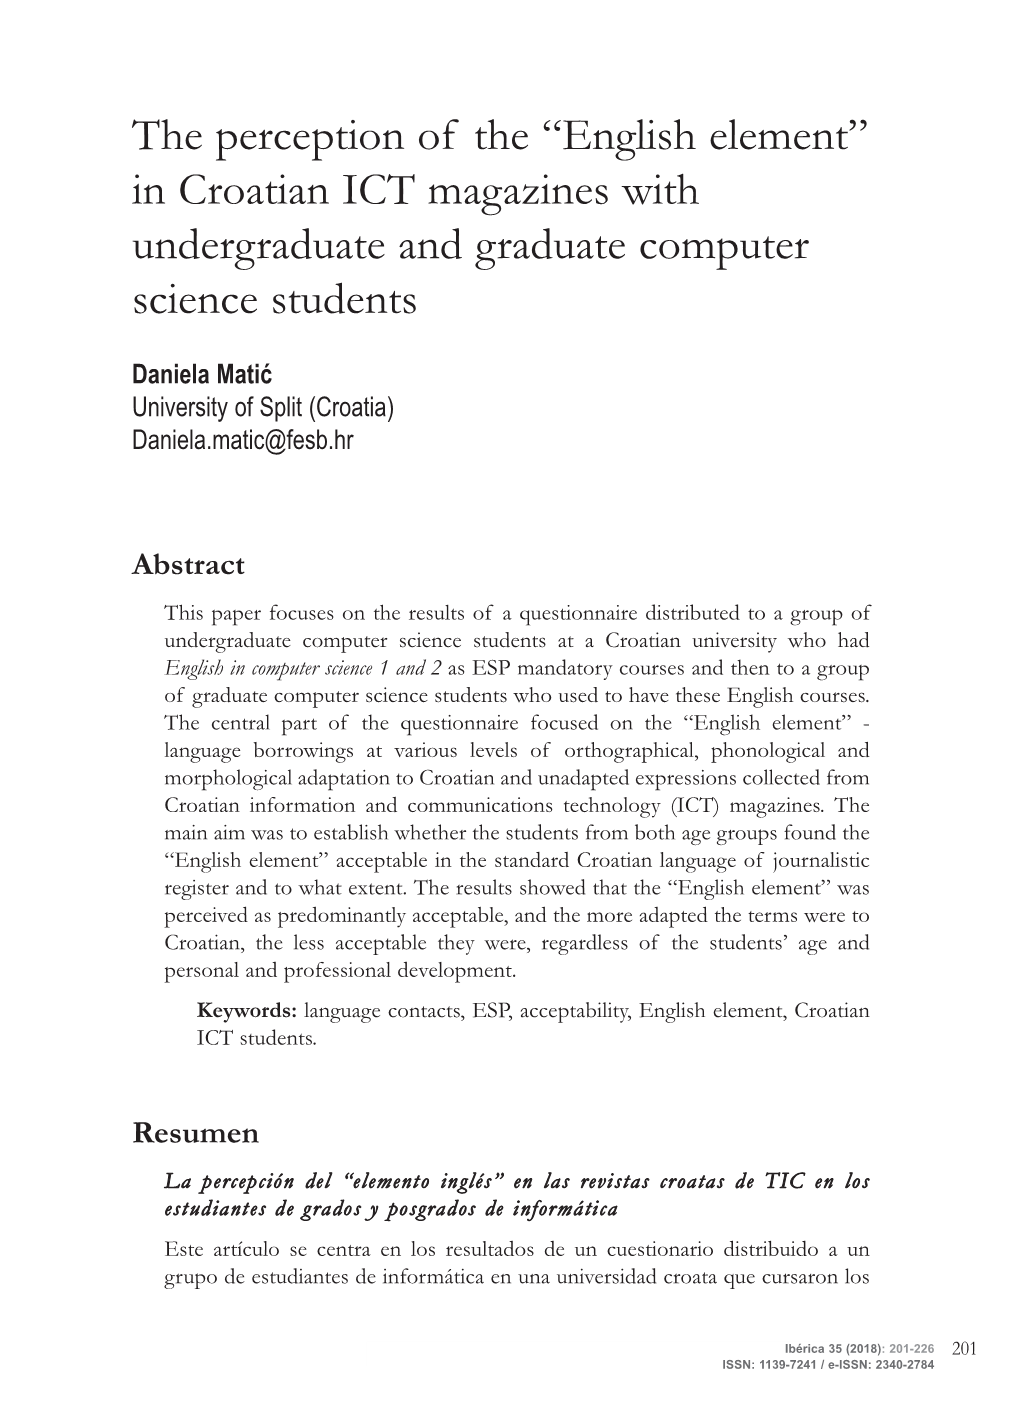 The Perception of the “English Element” in Croatian ICT Magazines with Undergraduate and Graduate Computer Science Students